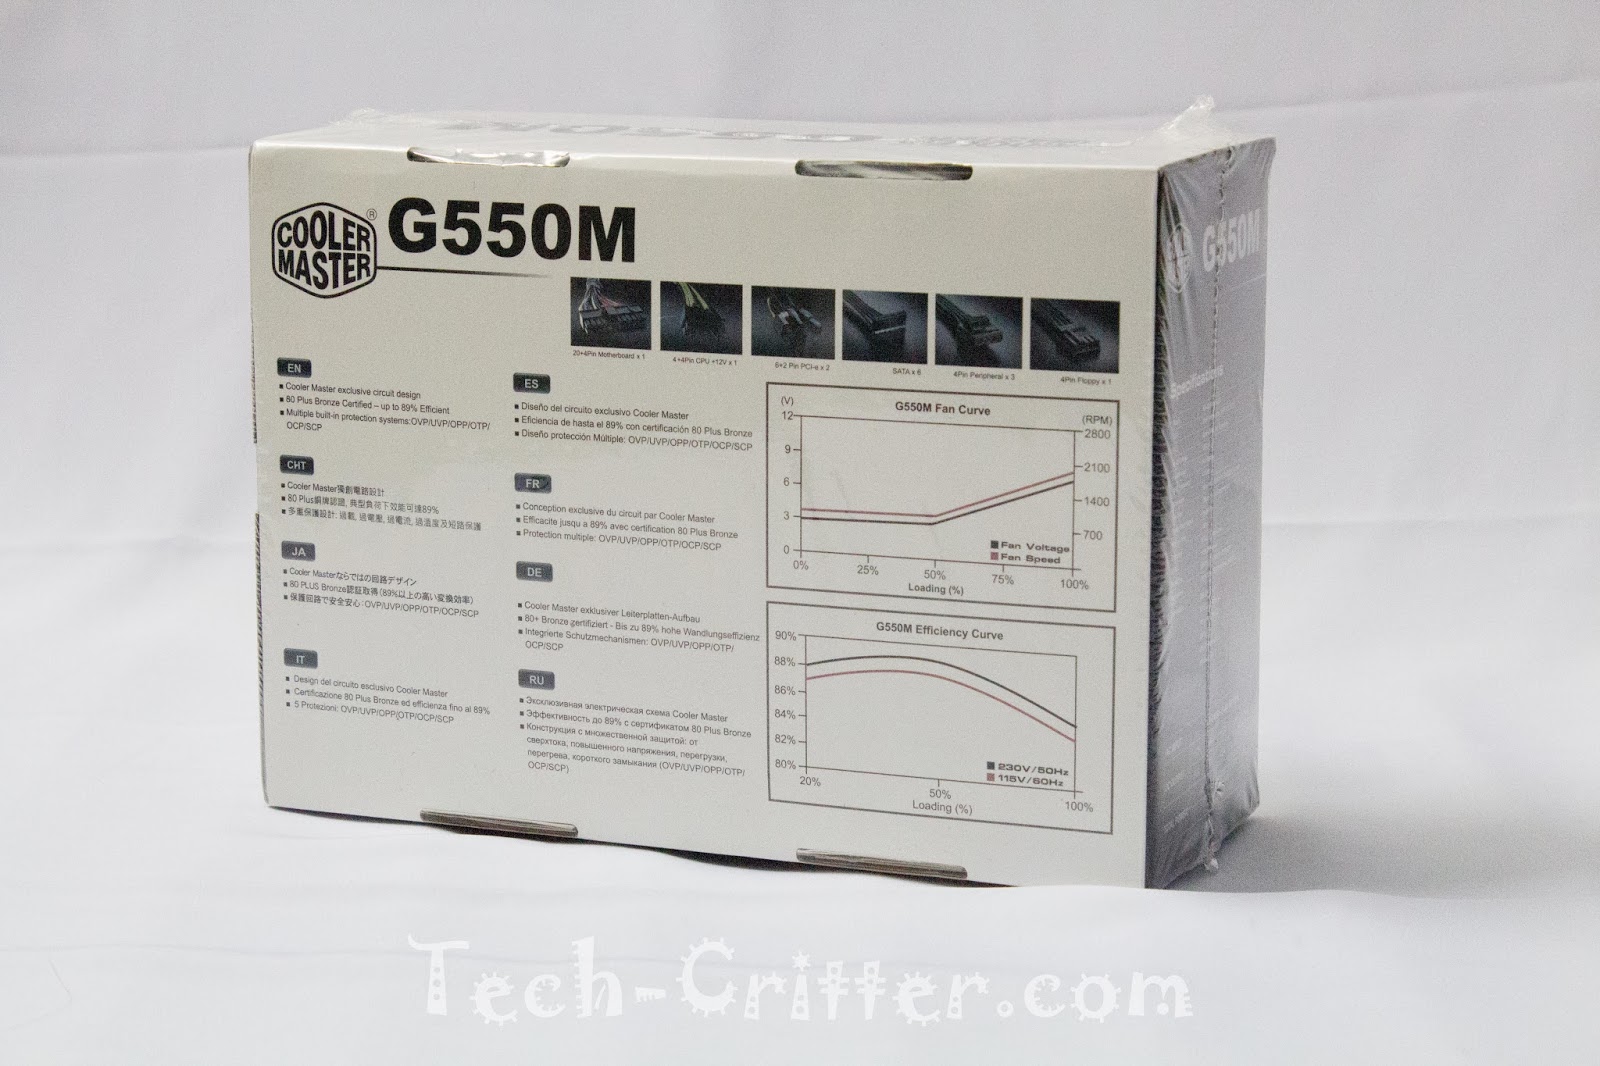 Cooler Master G550M Power Supply Unit Unboxing and Overview 26